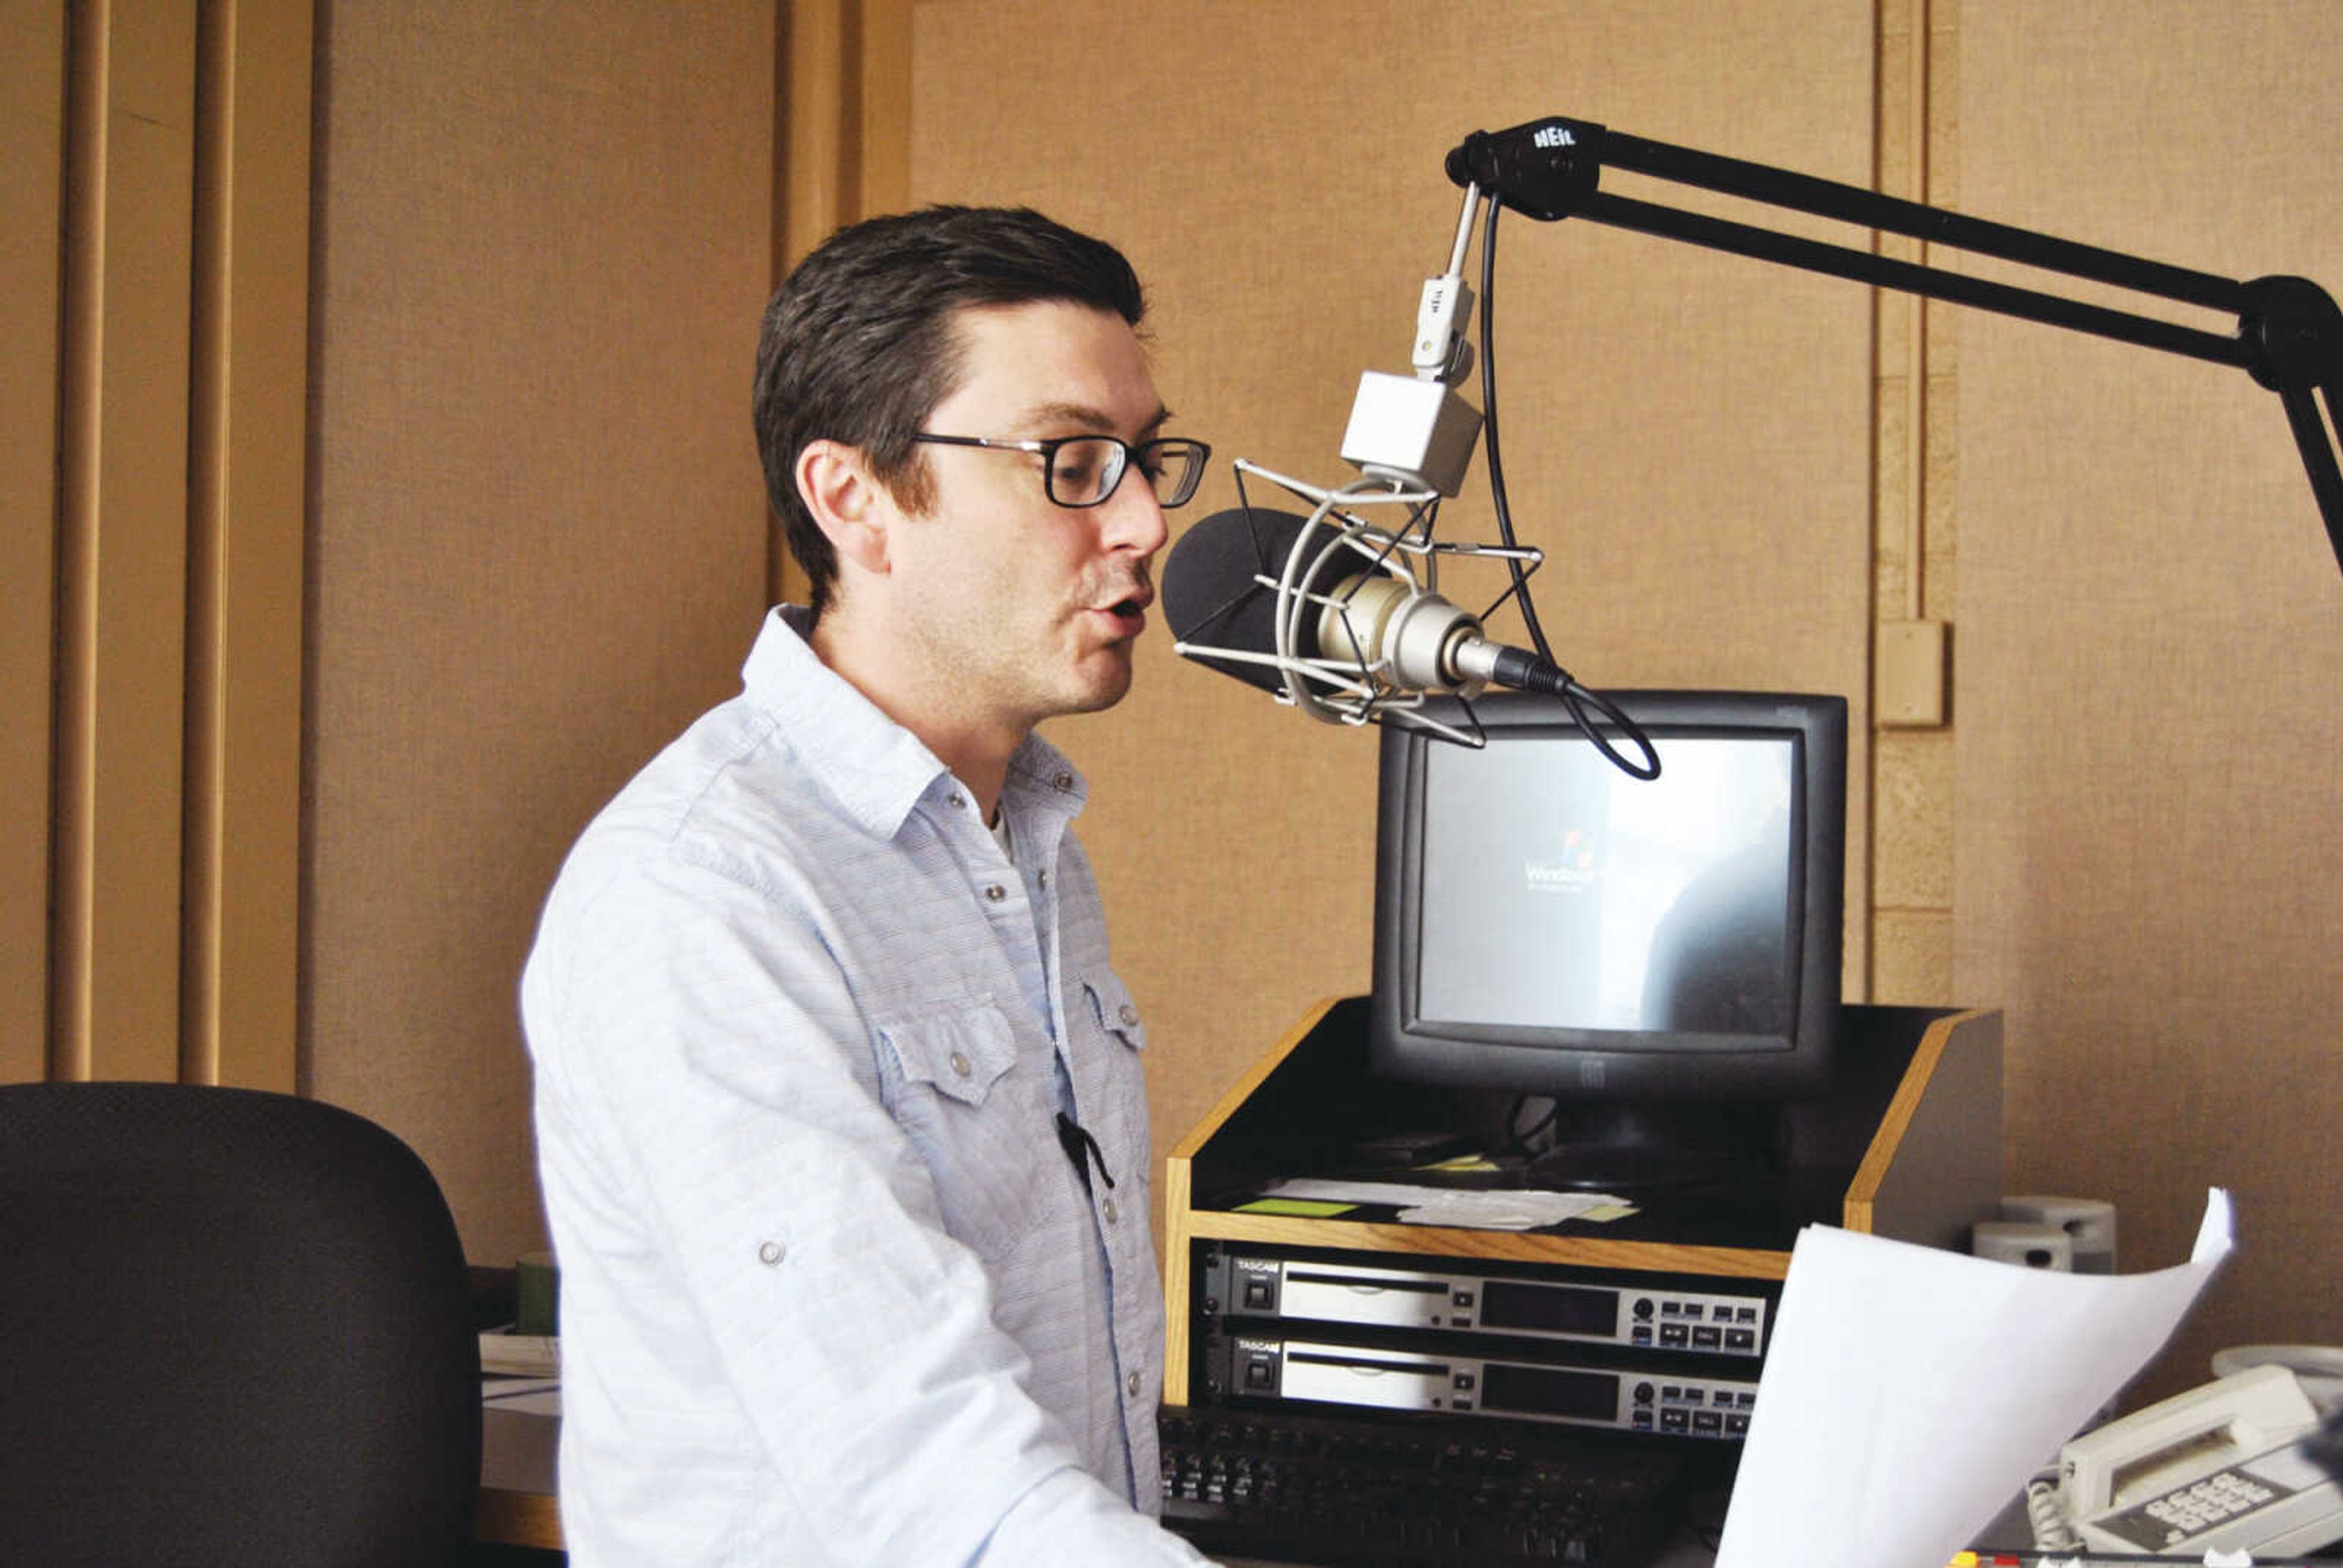 KRCU to offer three new shows